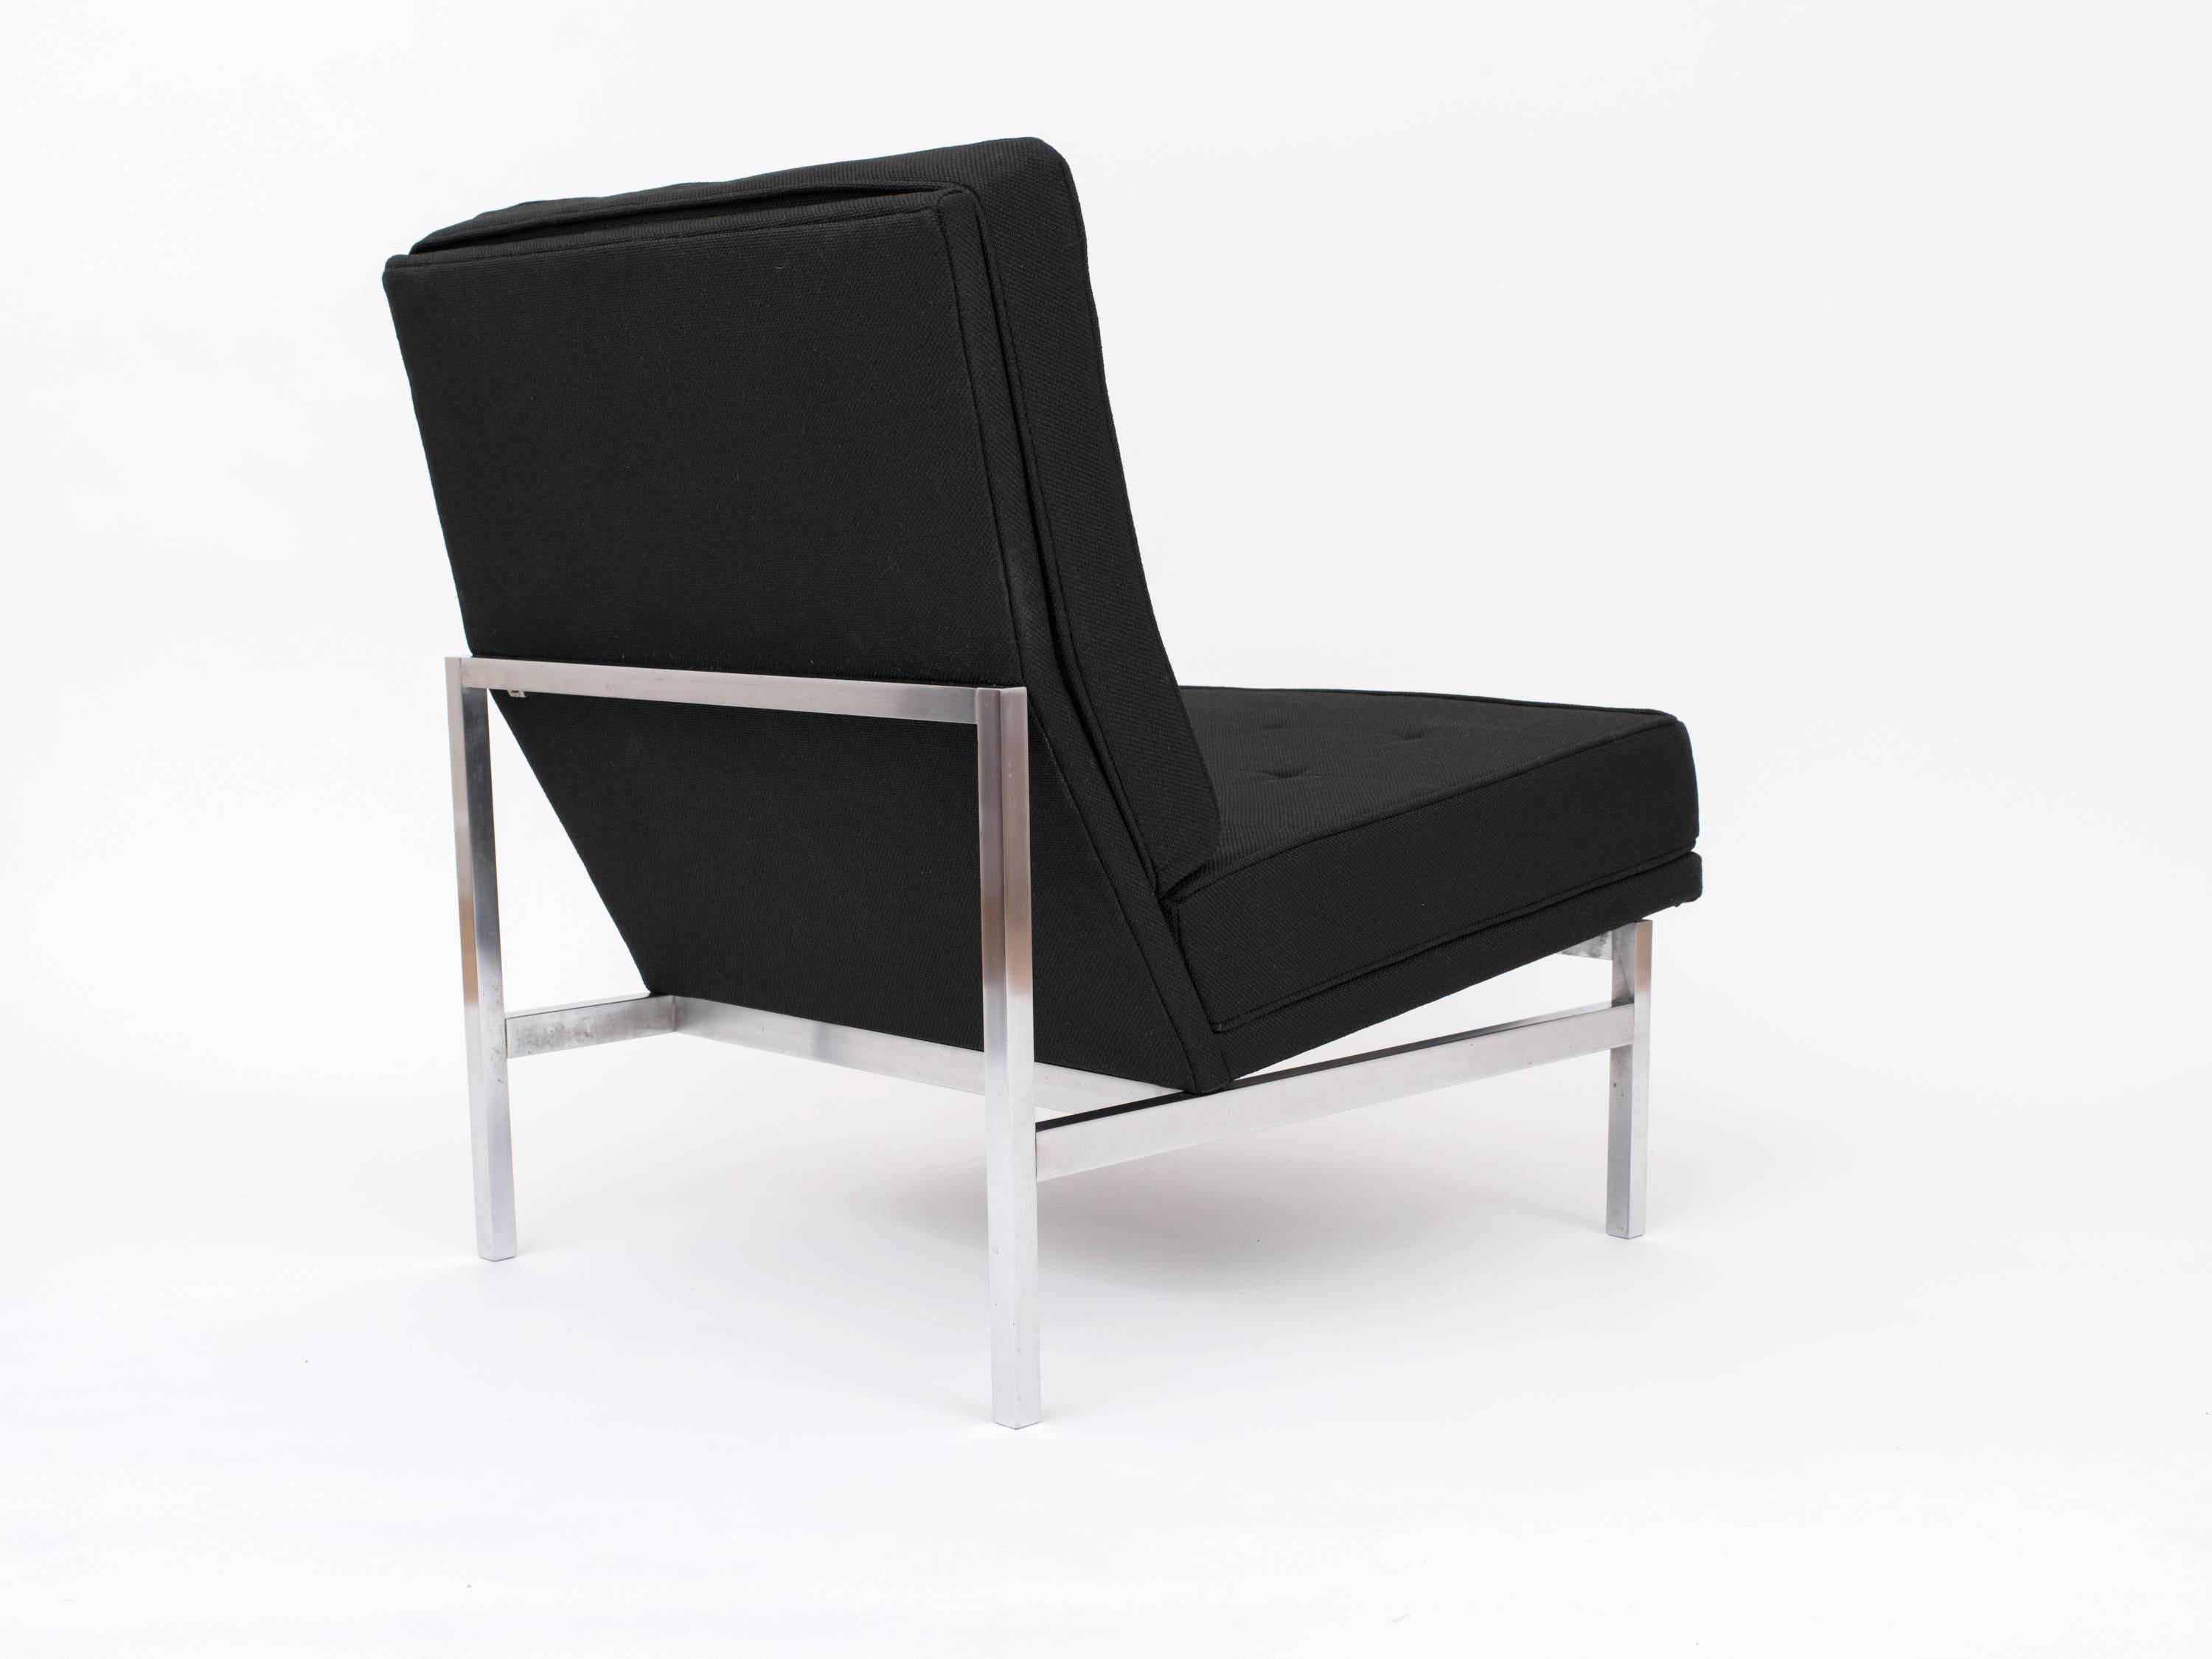 American Pair of Florence Knoll Slipper Lounge Chairs in Black Wool, 1955